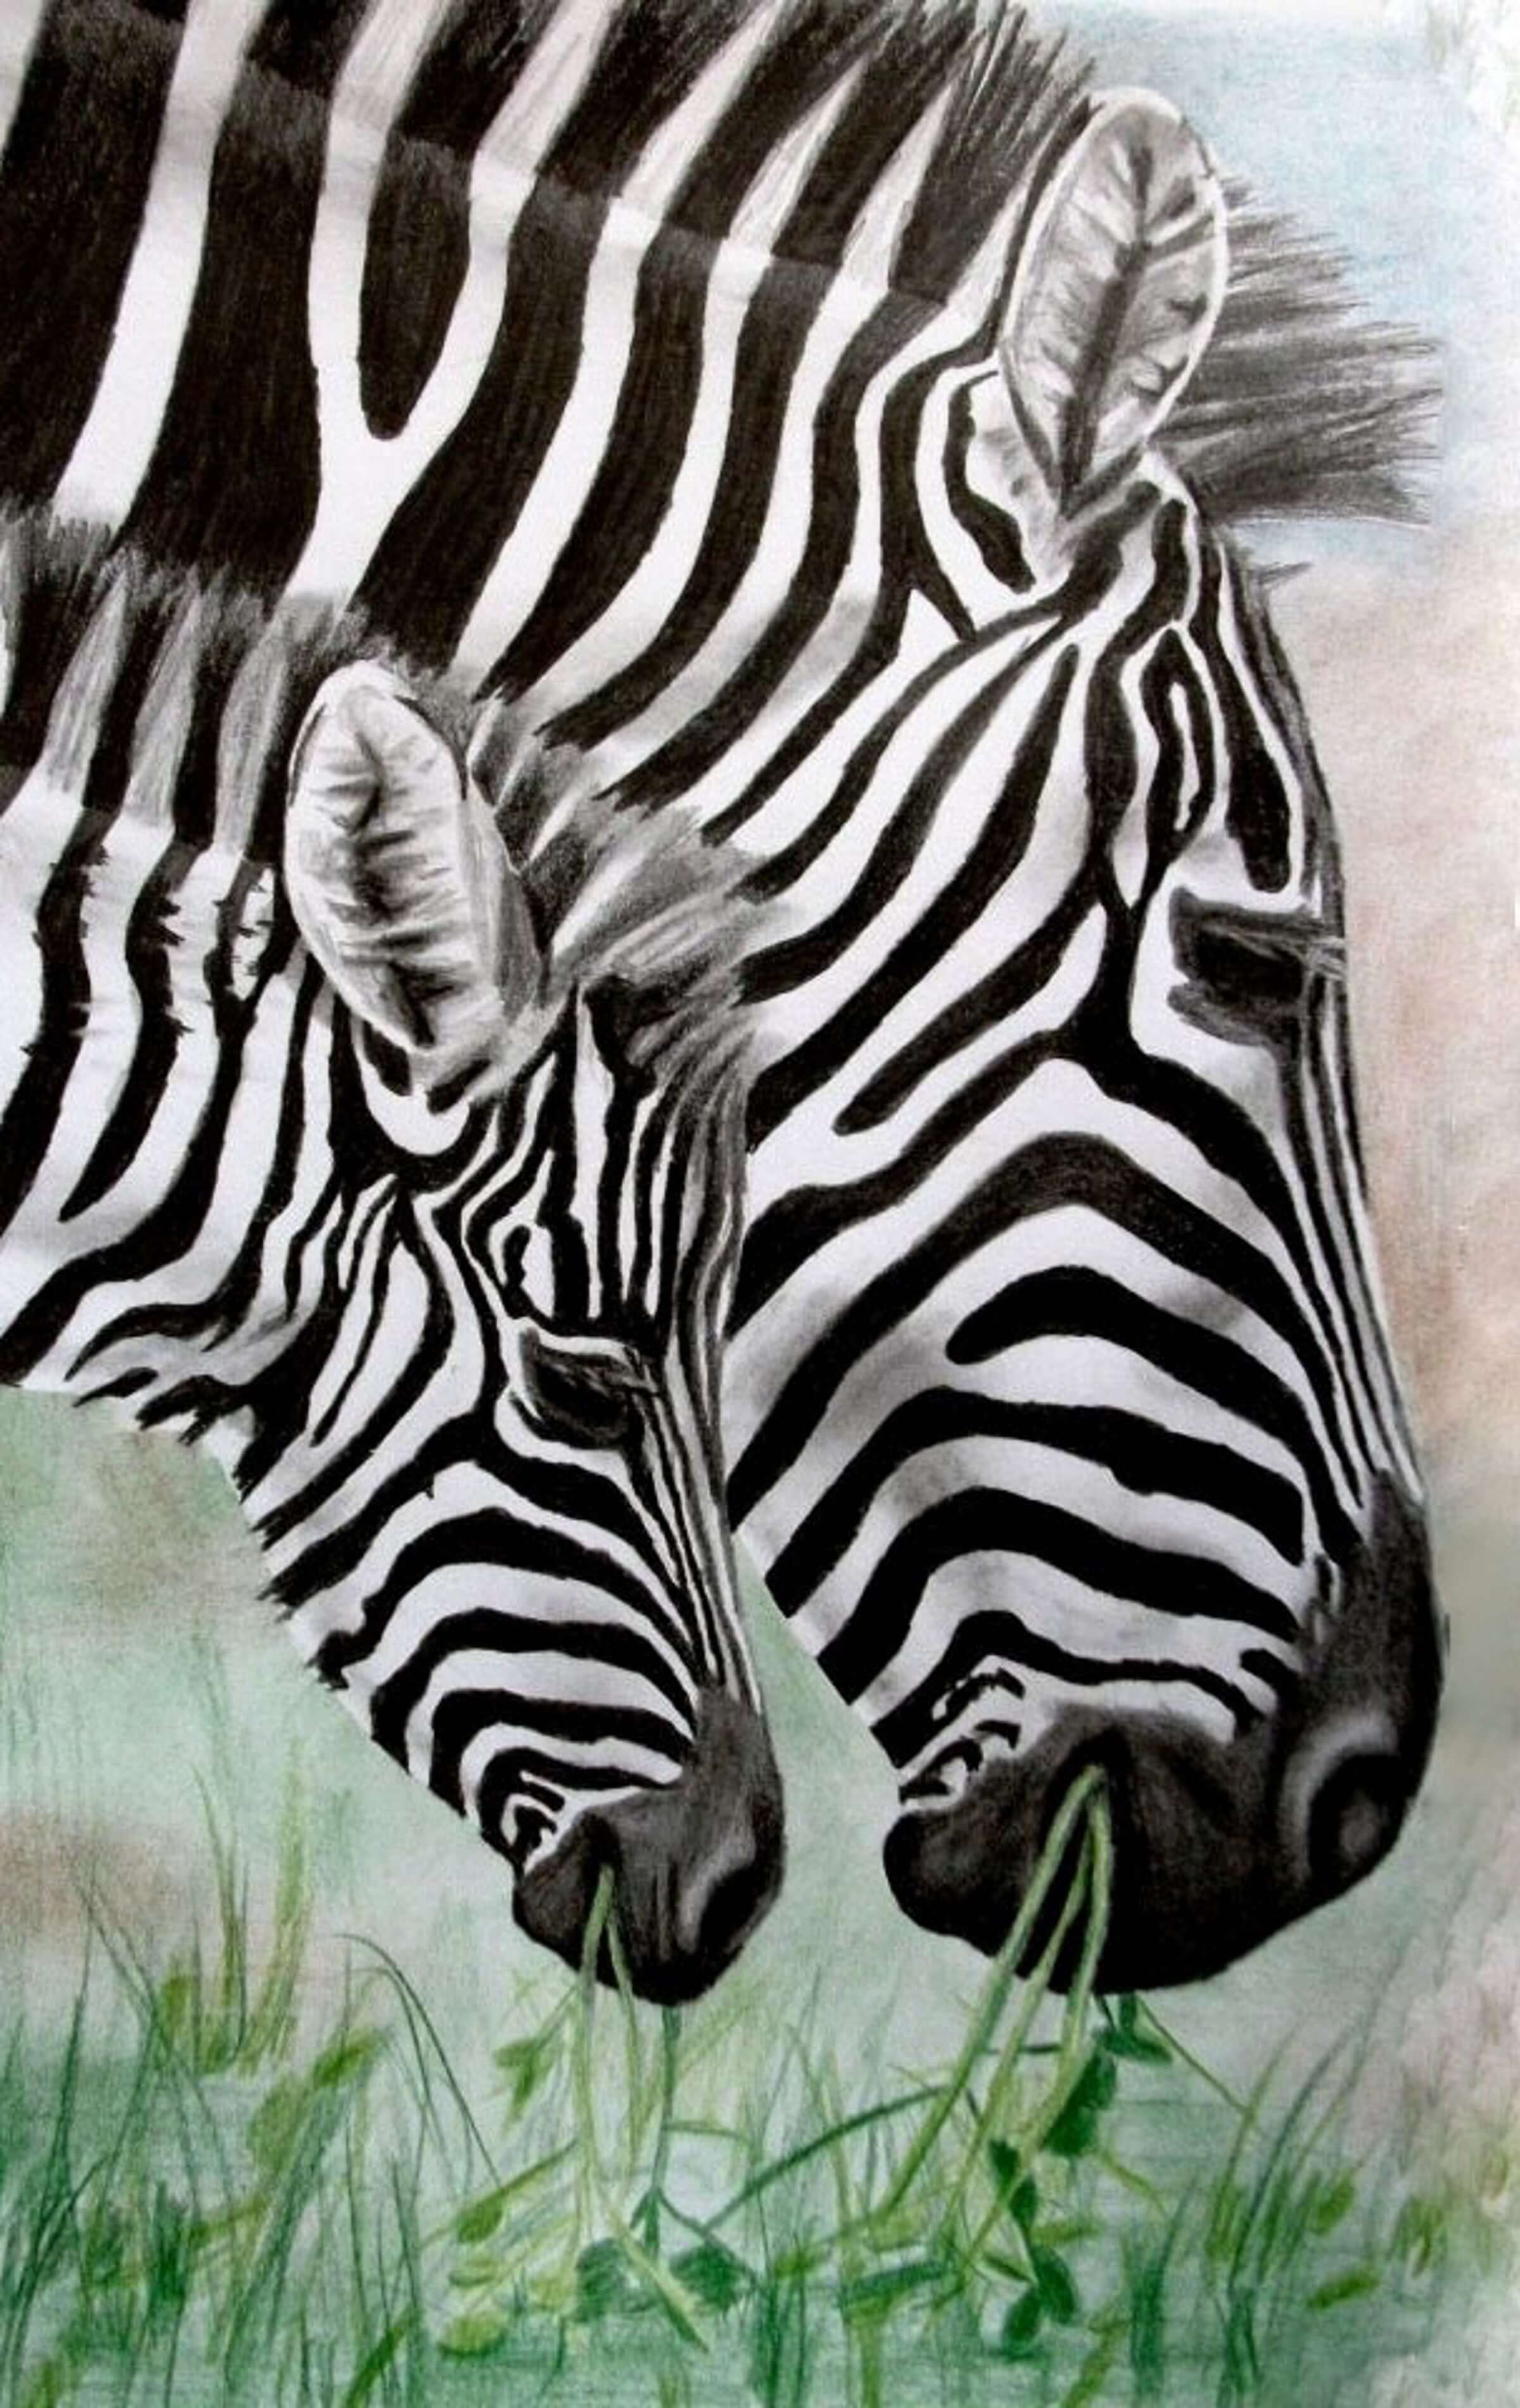 Photorealism drawing representing two zebras.